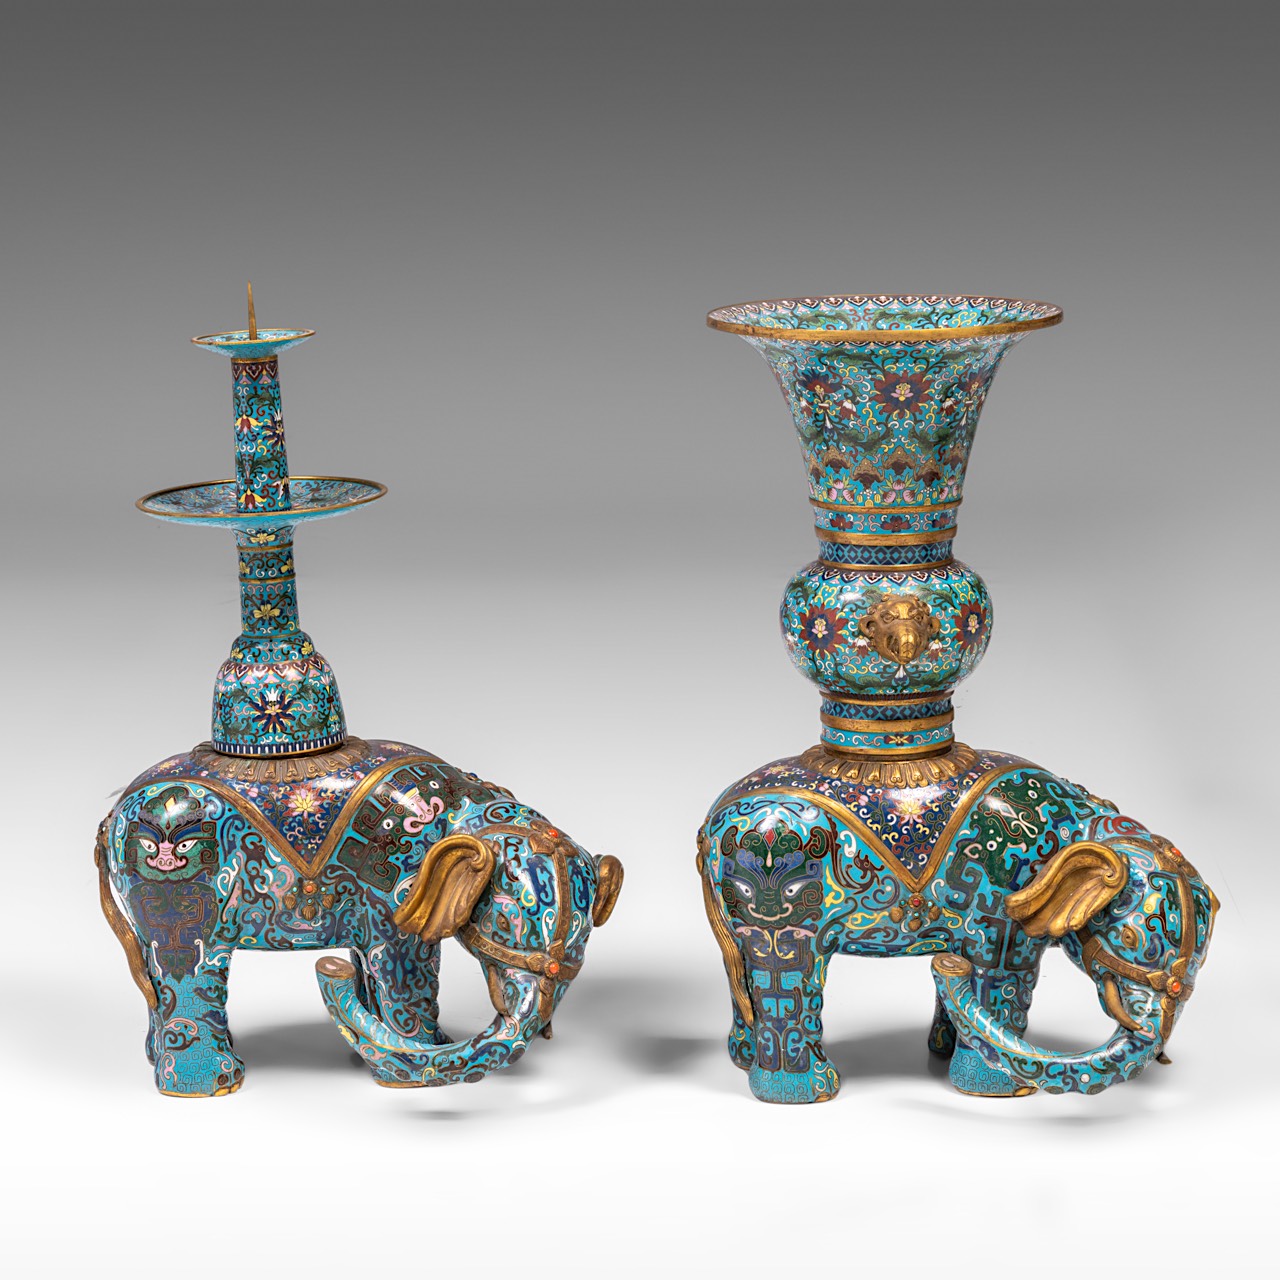 A Chinese five-piece semi-precious stone inlaid cloisonne garniture, late Qing/20thC, tallest H 58 - - Image 12 of 24